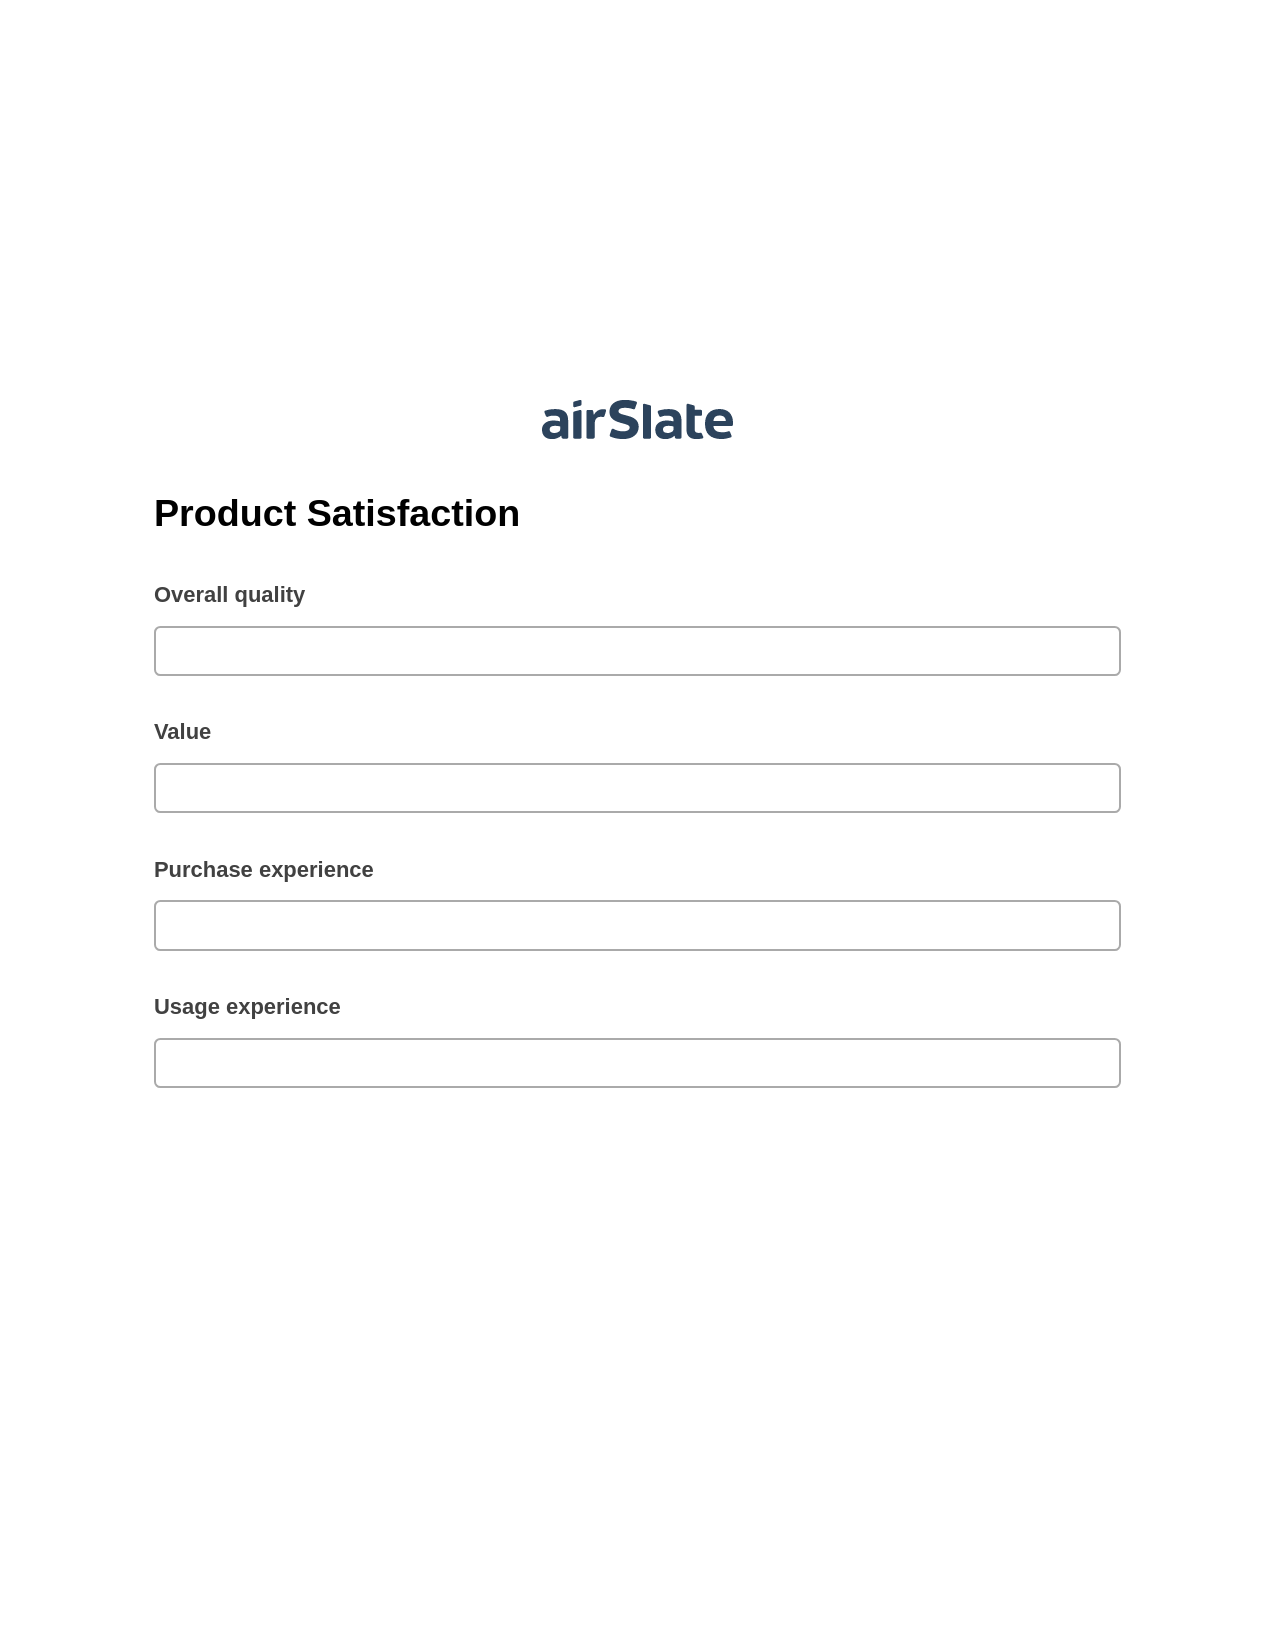 Multirole Product Satisfaction Pre-fill from CSV File Bot, Create Slate every Google Sheet Update Bot, Archive to SharePoint Folder Bot